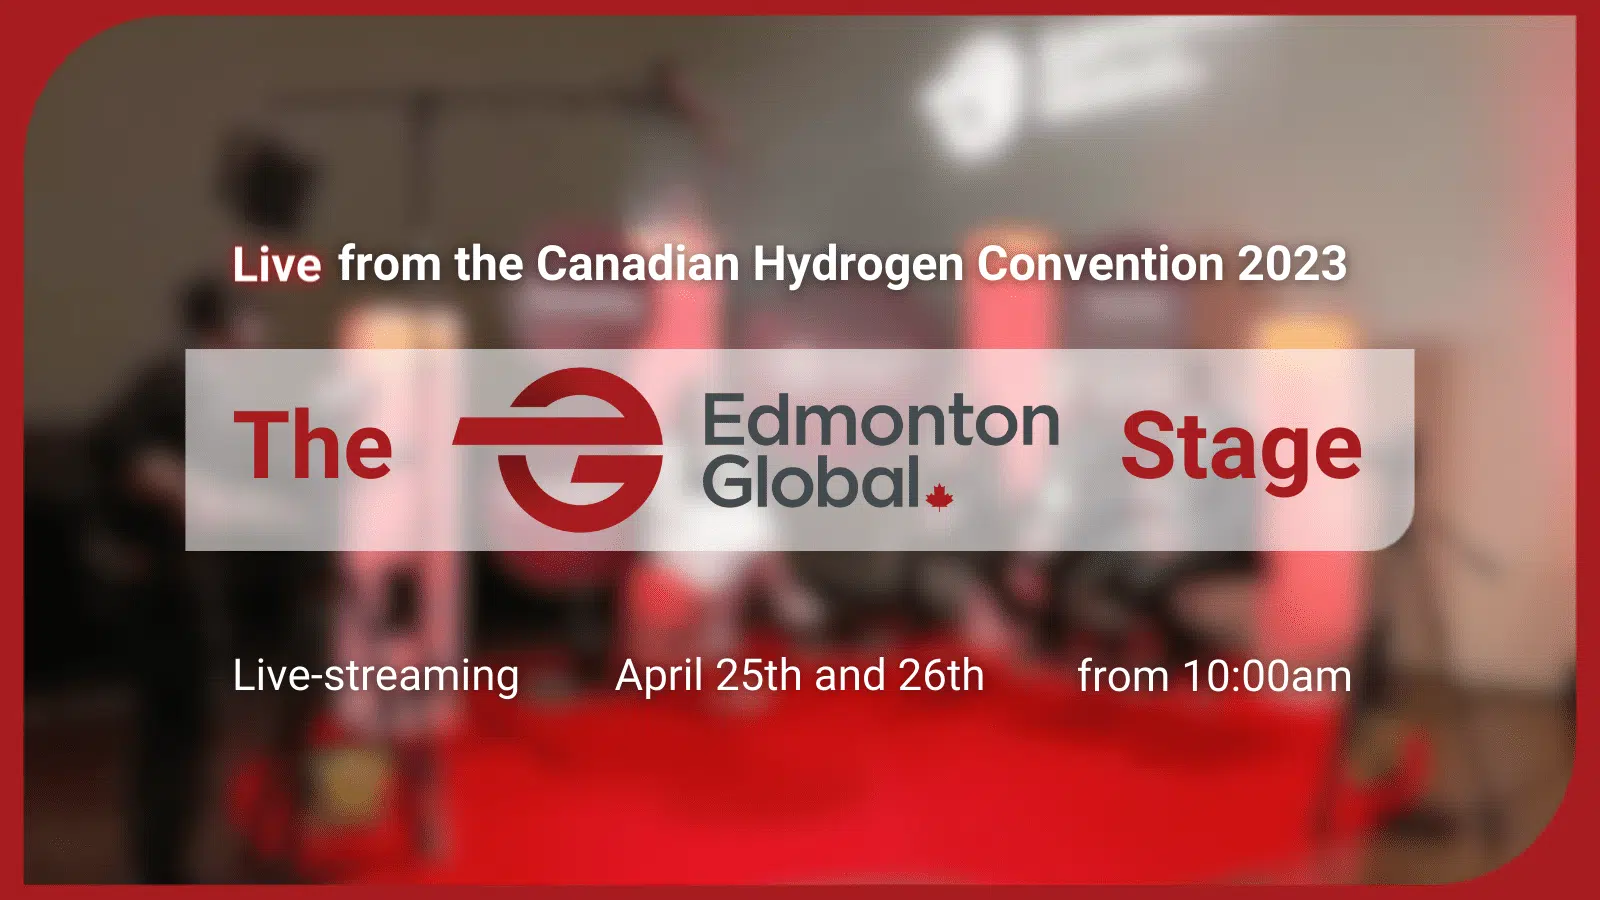 Live from the Canadian Hydrogen Convention - tune in April 25 and 26 livestream from the Edmonton Global stage